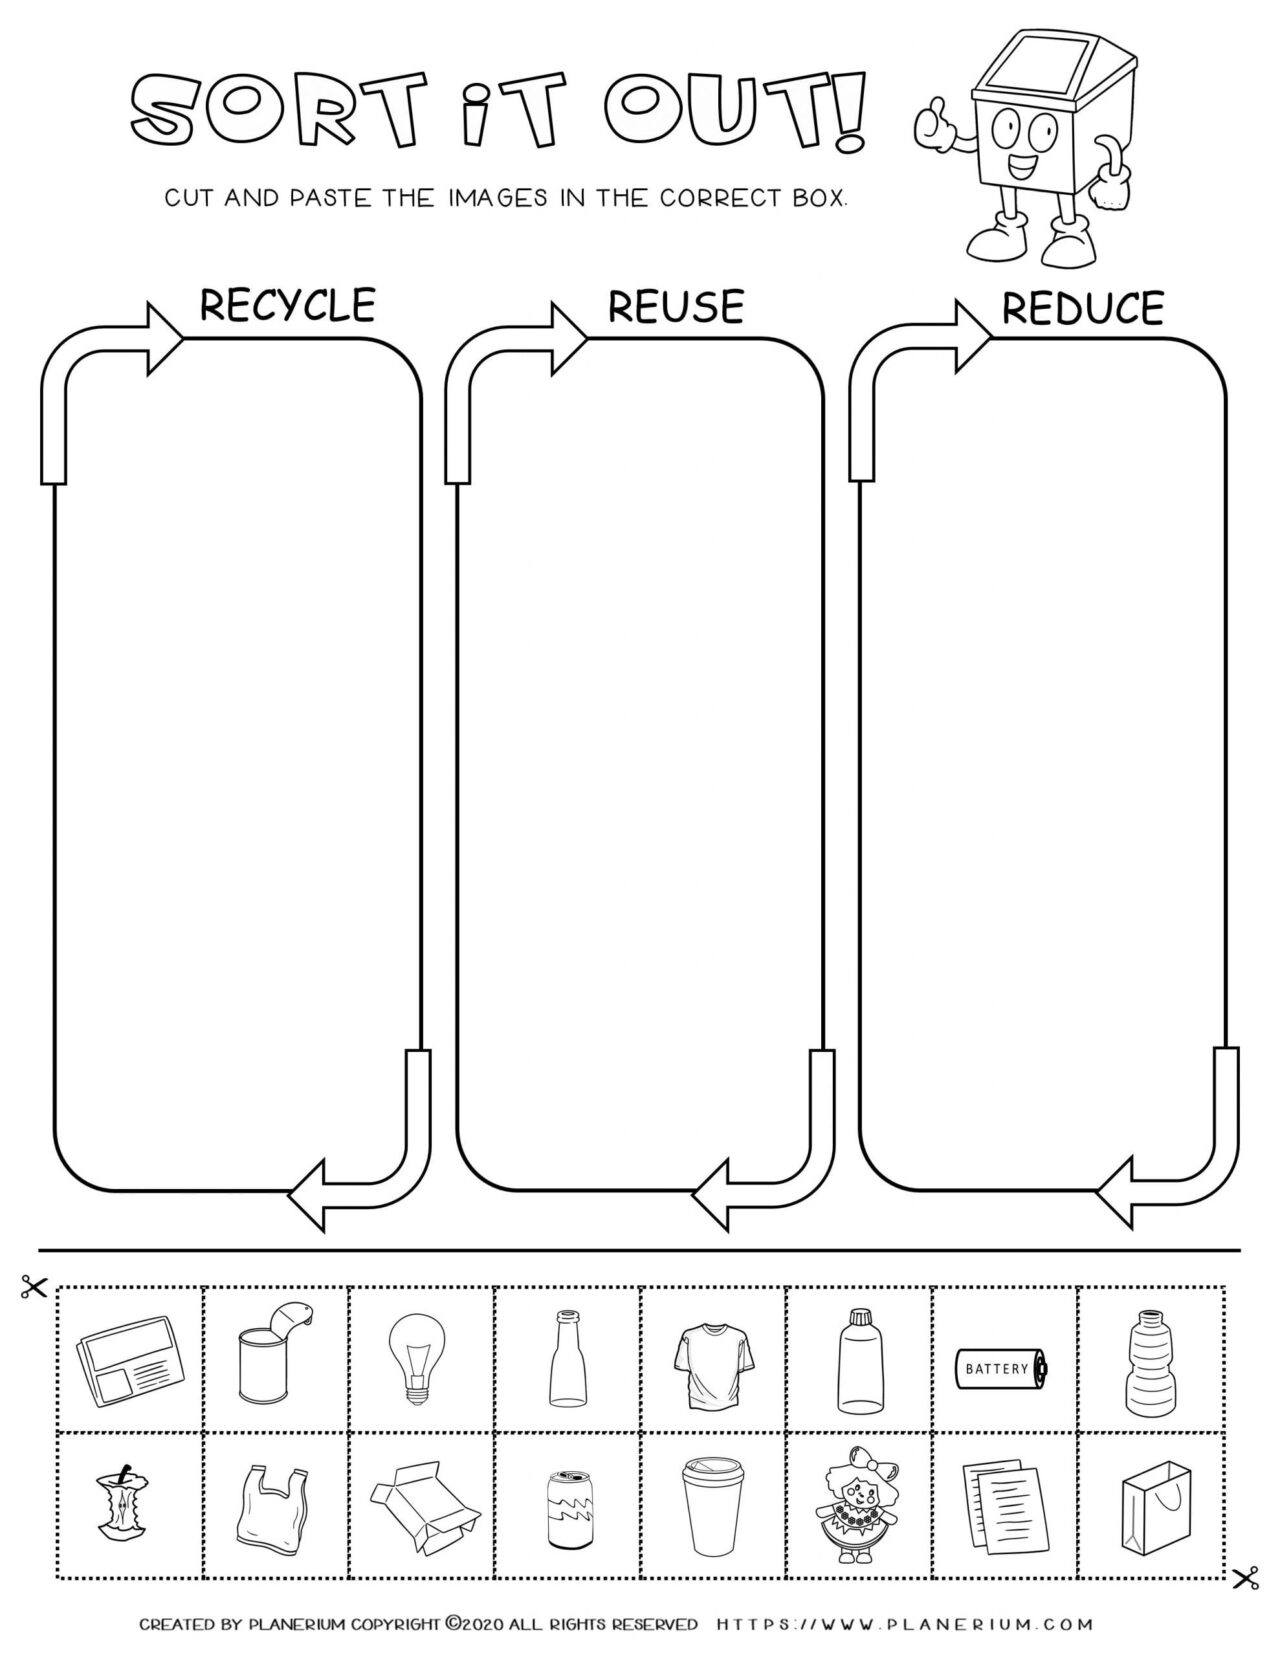 Earth Day - Worksheet - Sorting recycled items  Planerium With Reduce Reuse Recycle Worksheet